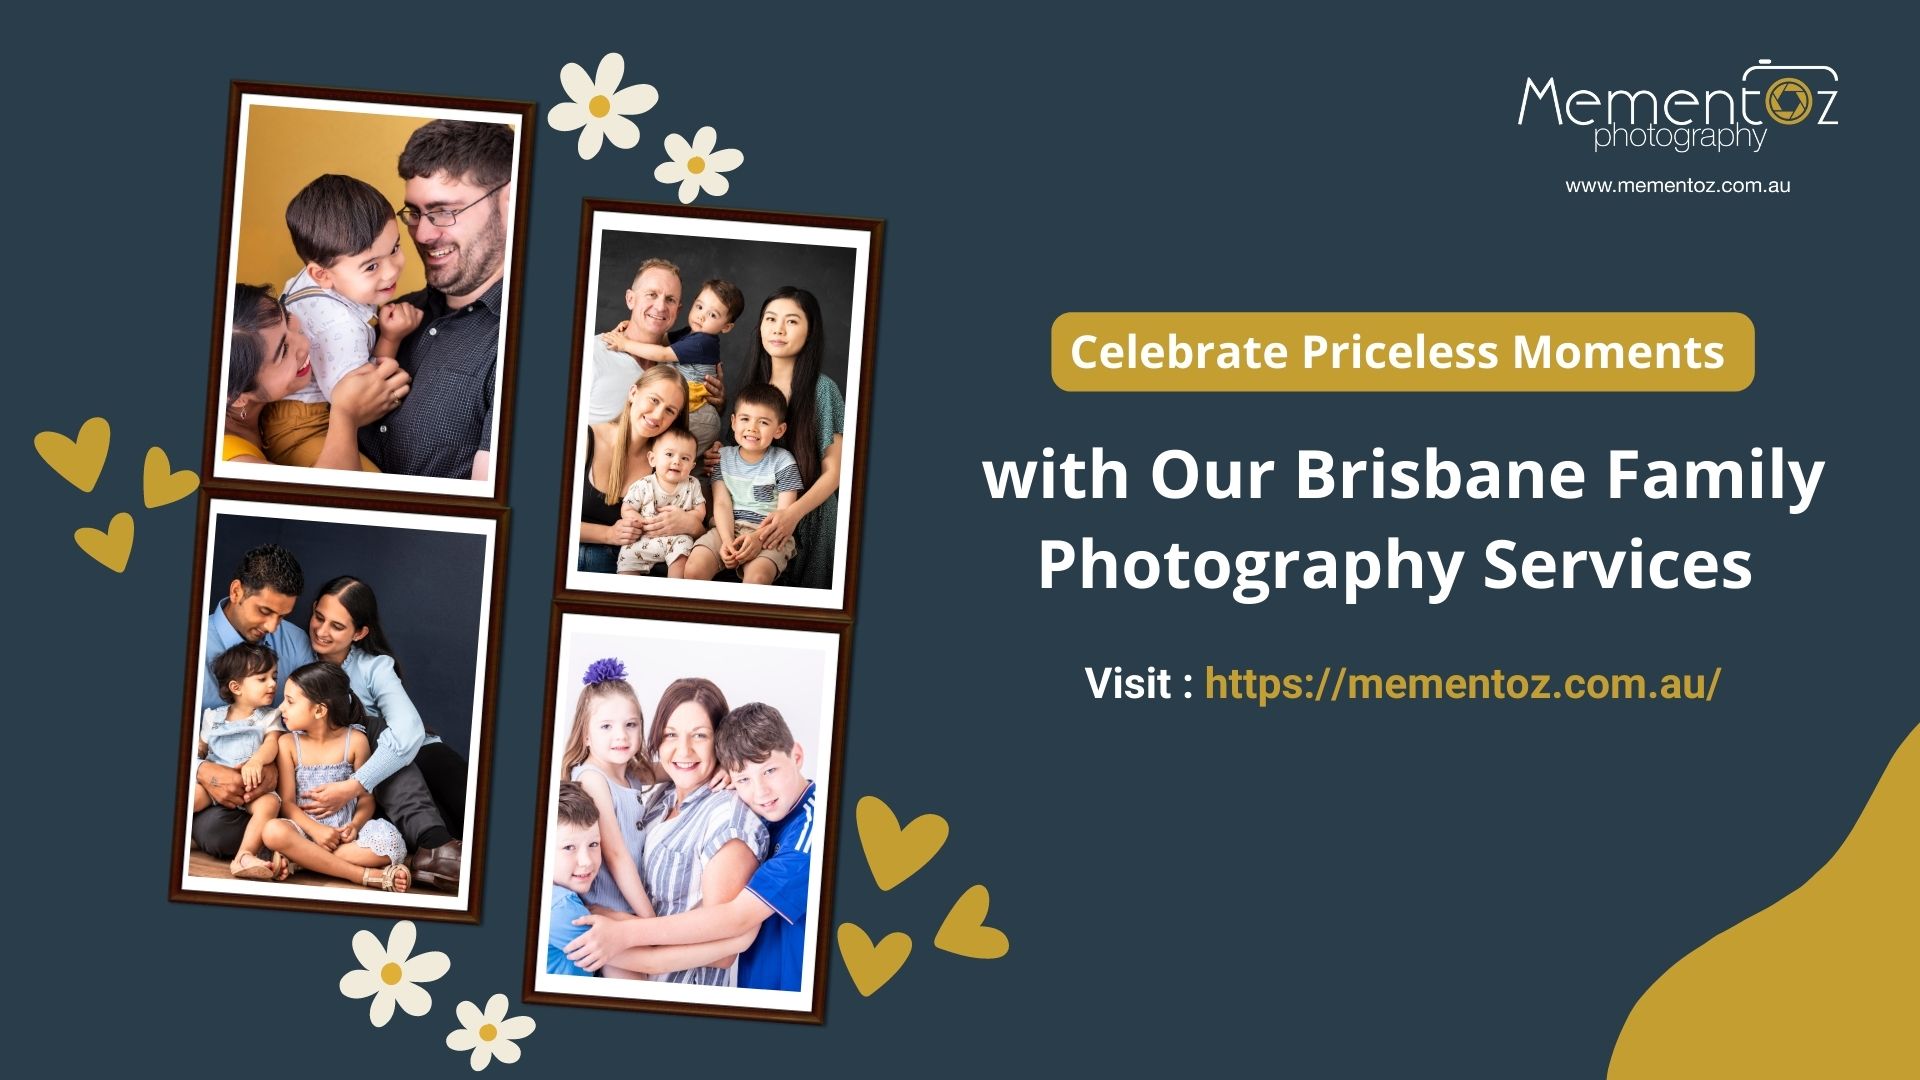 Kapil Mehta, Professional Portrait Photographer from MementOz Photography, Specialised in Brisbane Family Photography Services